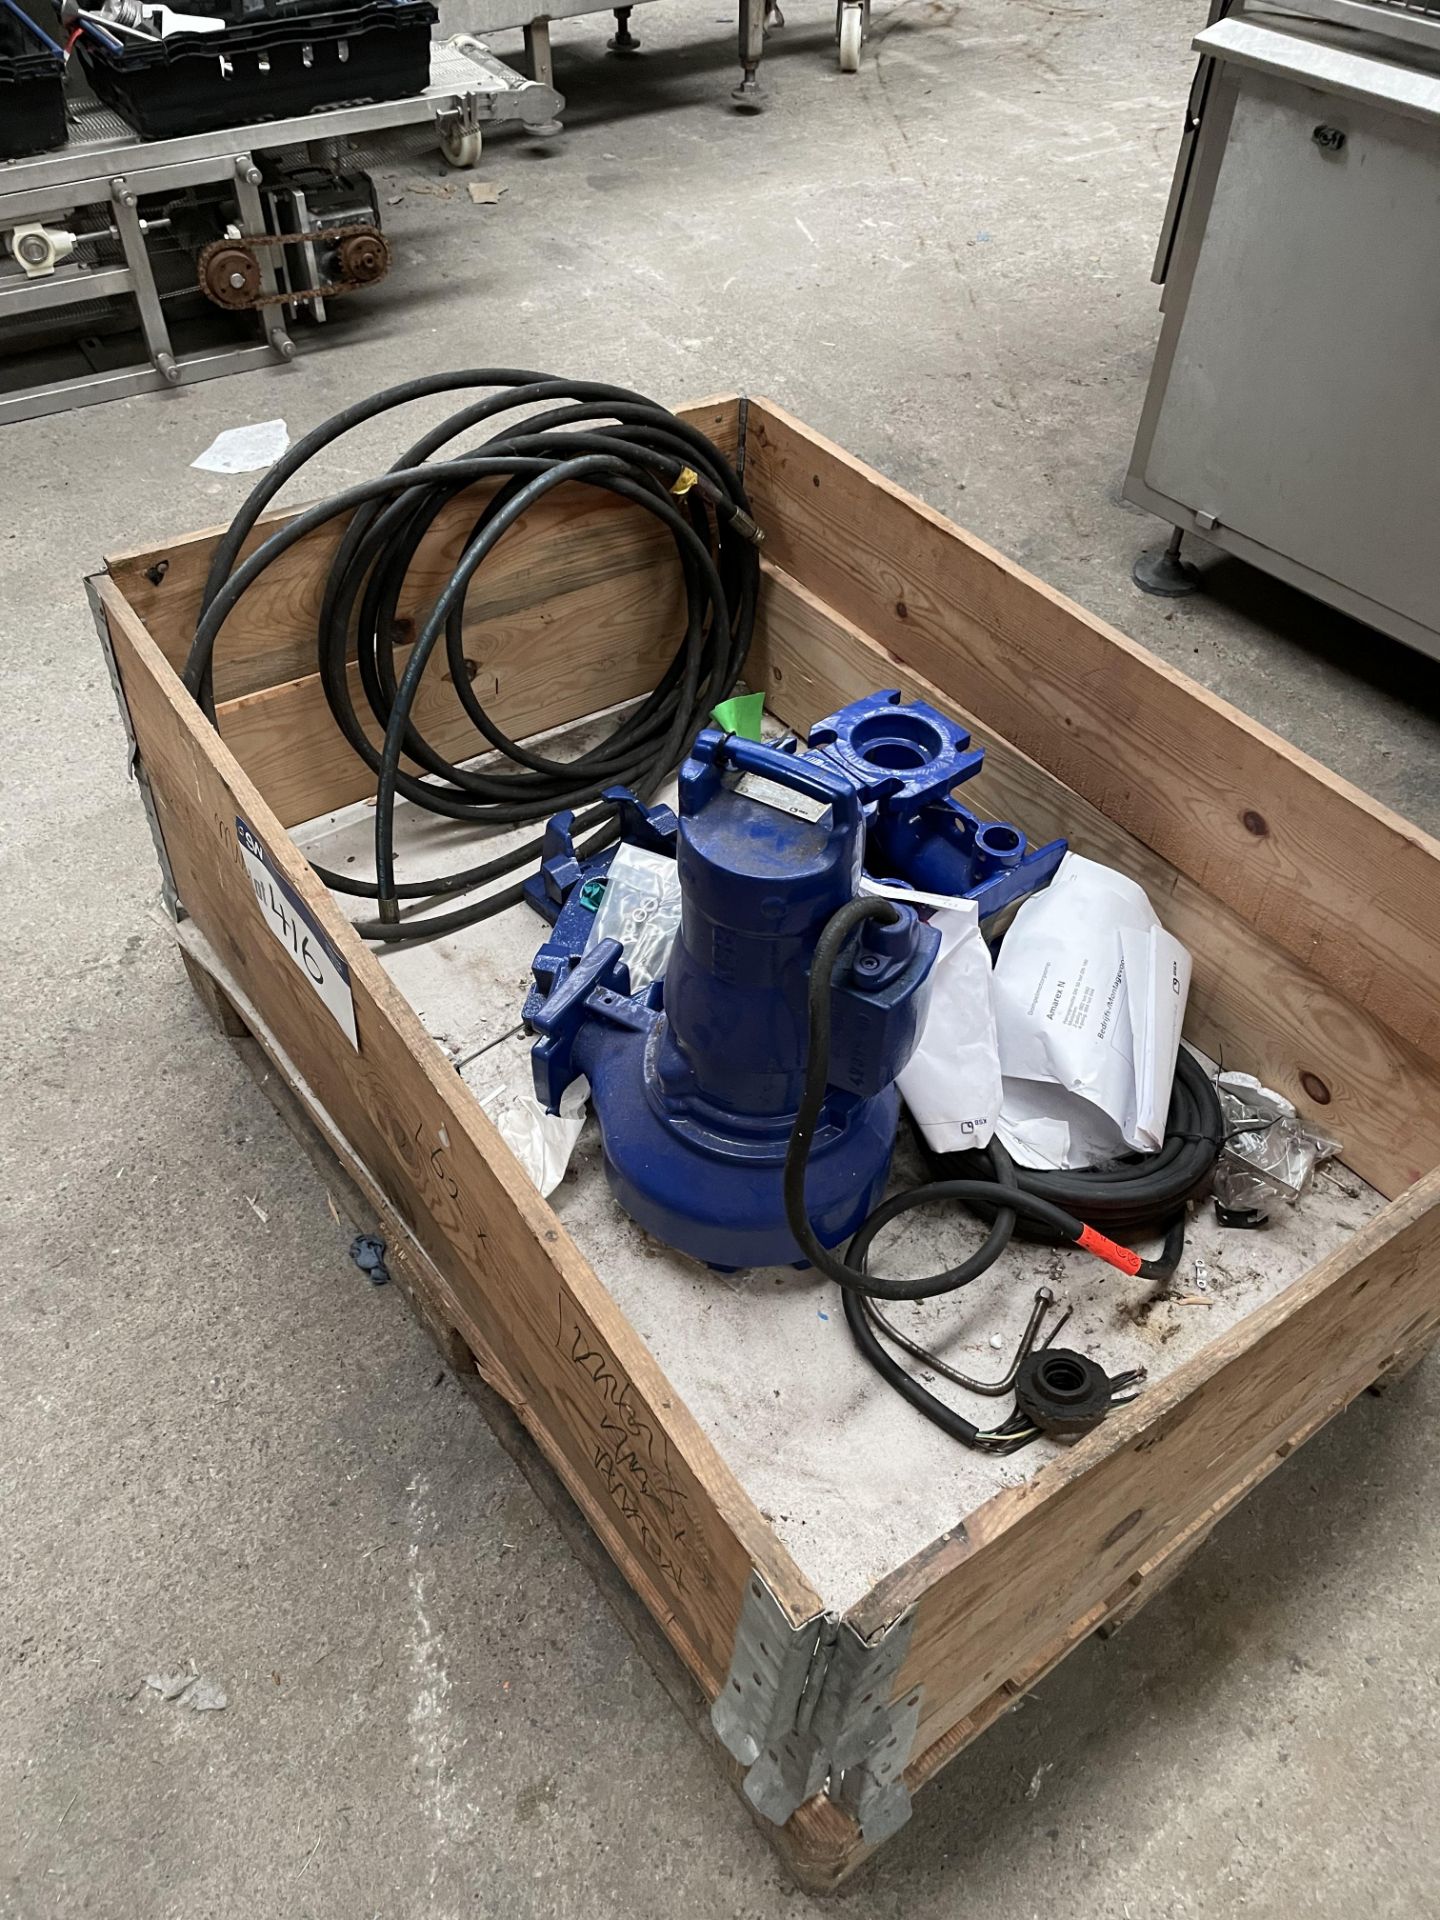 KSB Amarex MP65-220/024ULC/185 Pump Unit, as set out in timber cratePlease read the following